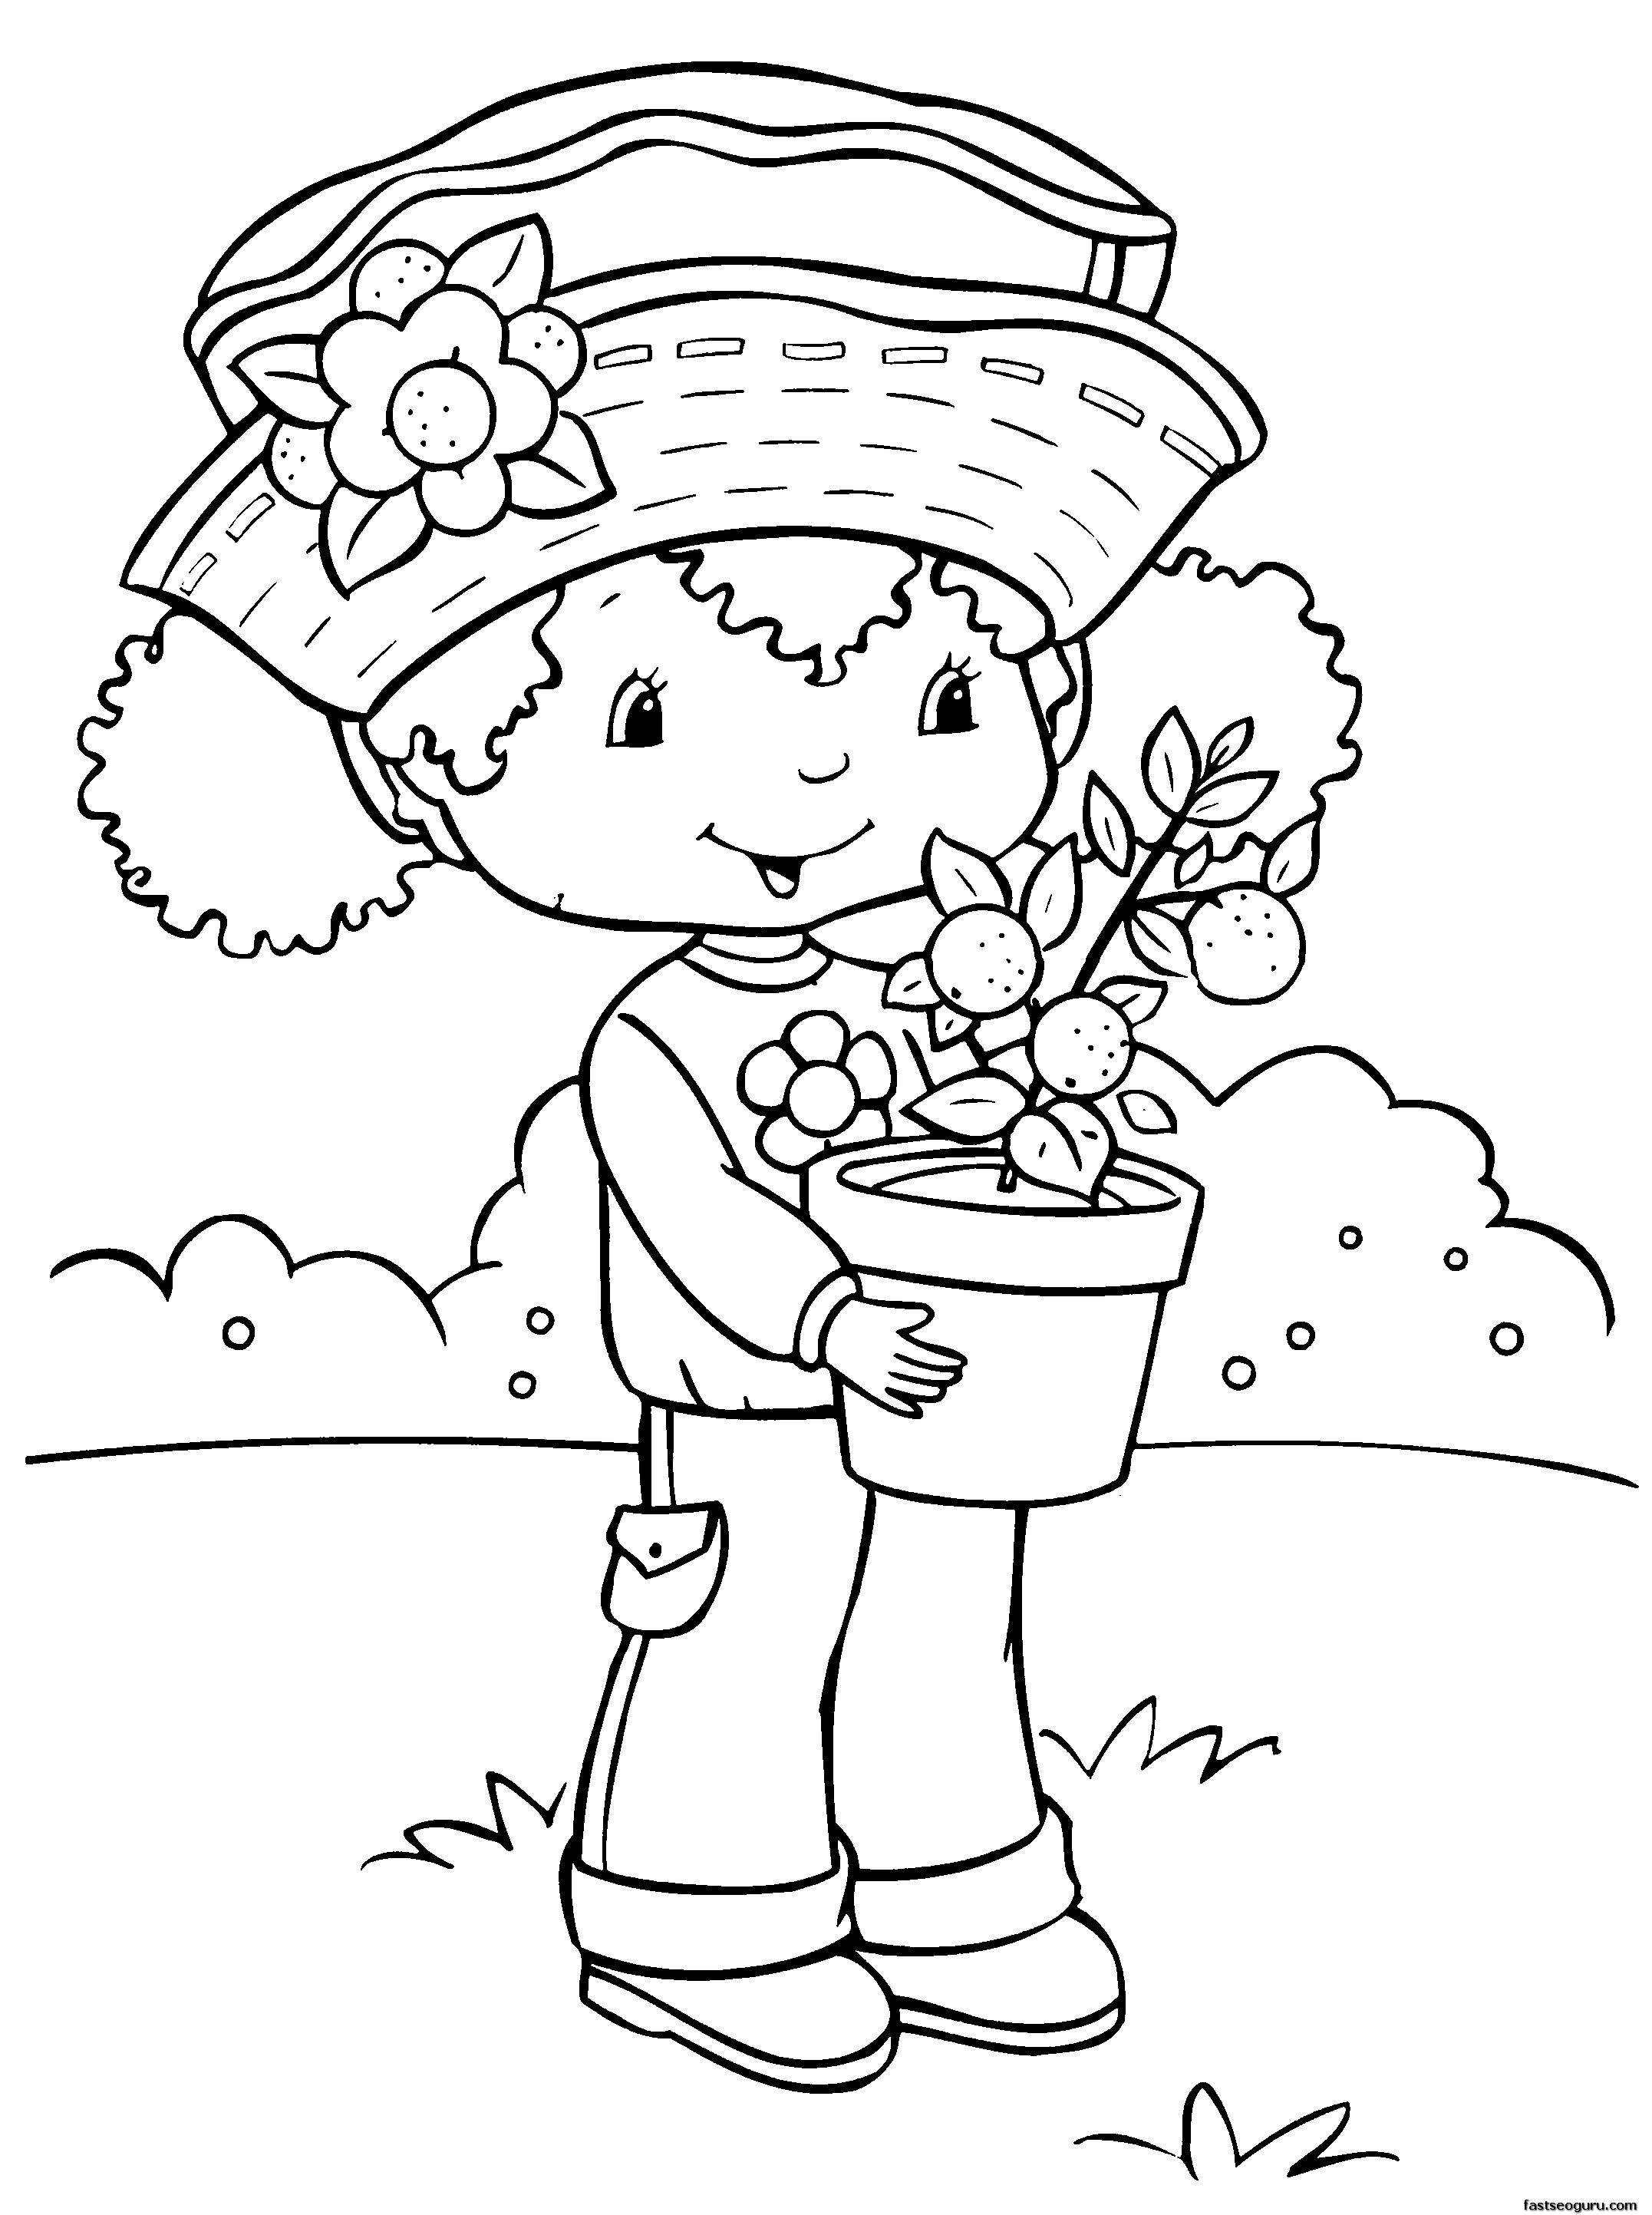 Drawing Little Girl #96643 (Characters) – Printable coloring pages